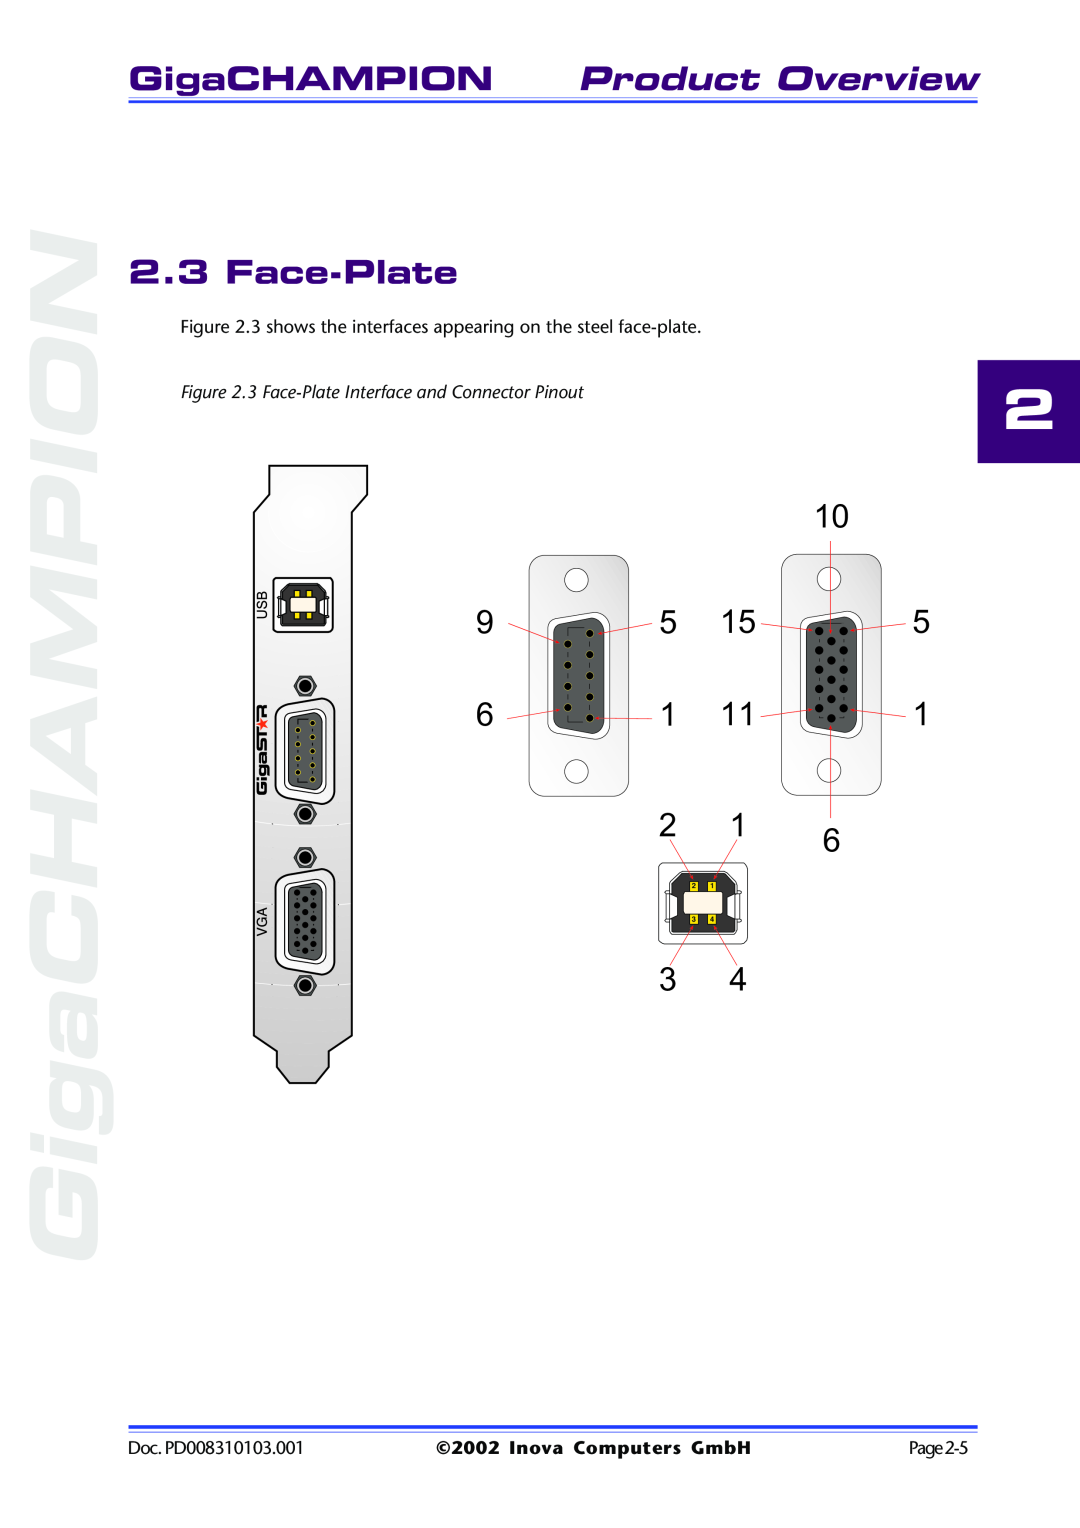 Inova PD008310103.001 AB GigaCHAMPION Product Overview, 3 Face-Plate Interface and Connector Pinout, Page2-5 